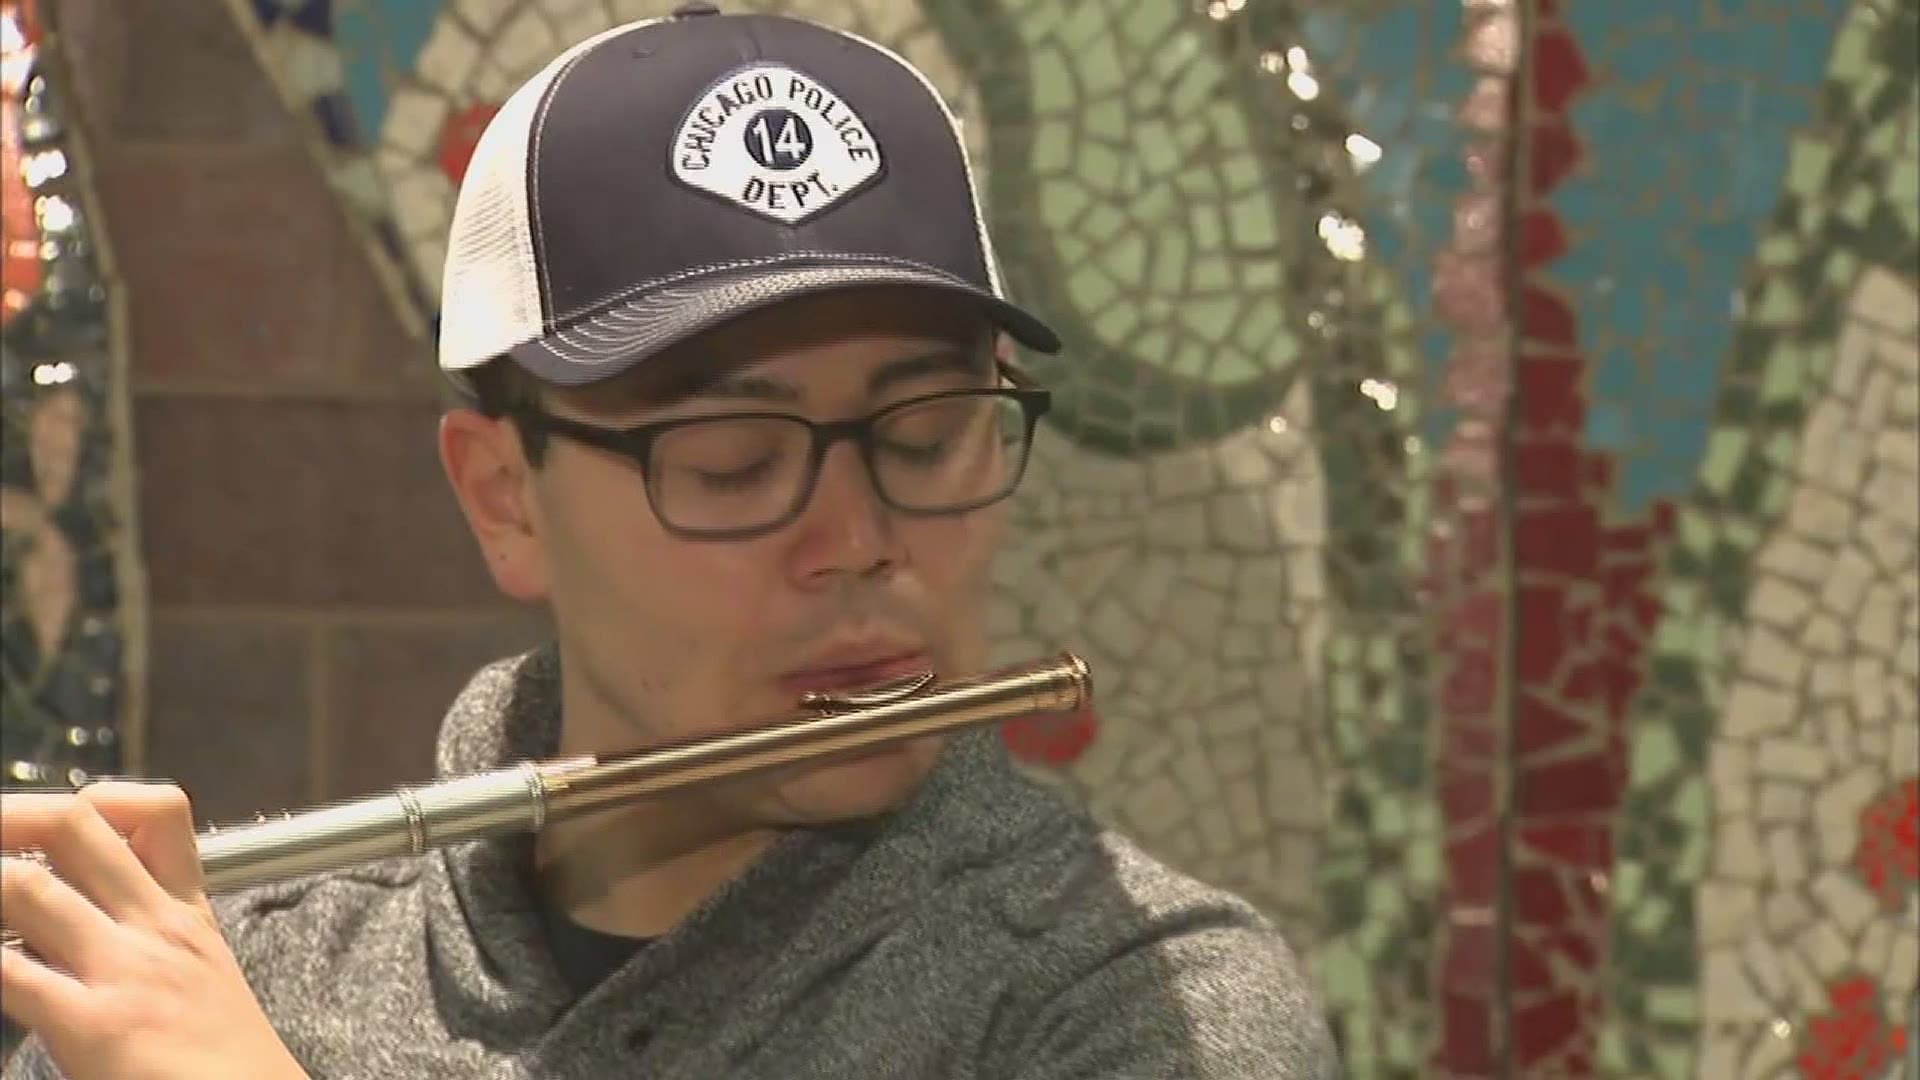 Flautist Donald Rabin was riding the Blue Line when he lost the flute previously belonging to his grandmother.